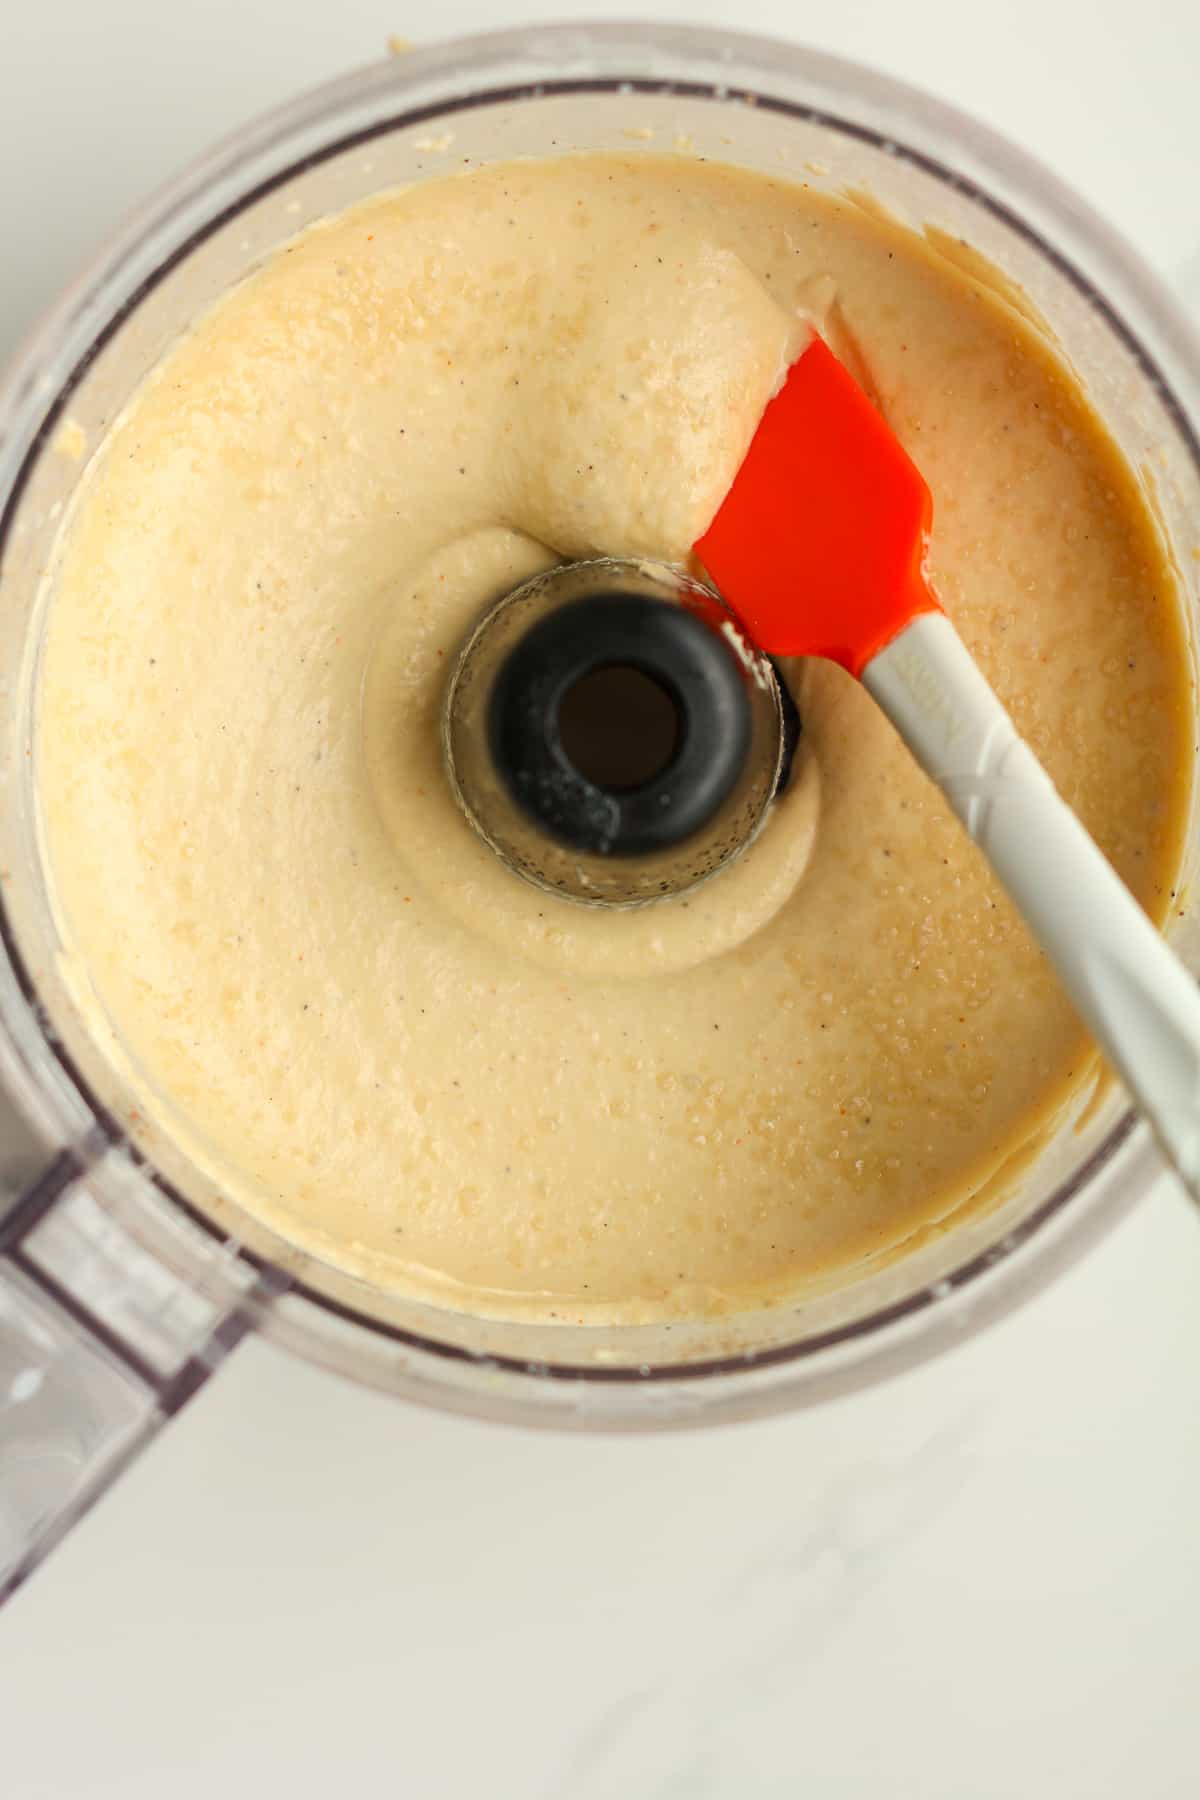 A food processor with a spatula dipped into the hummus.